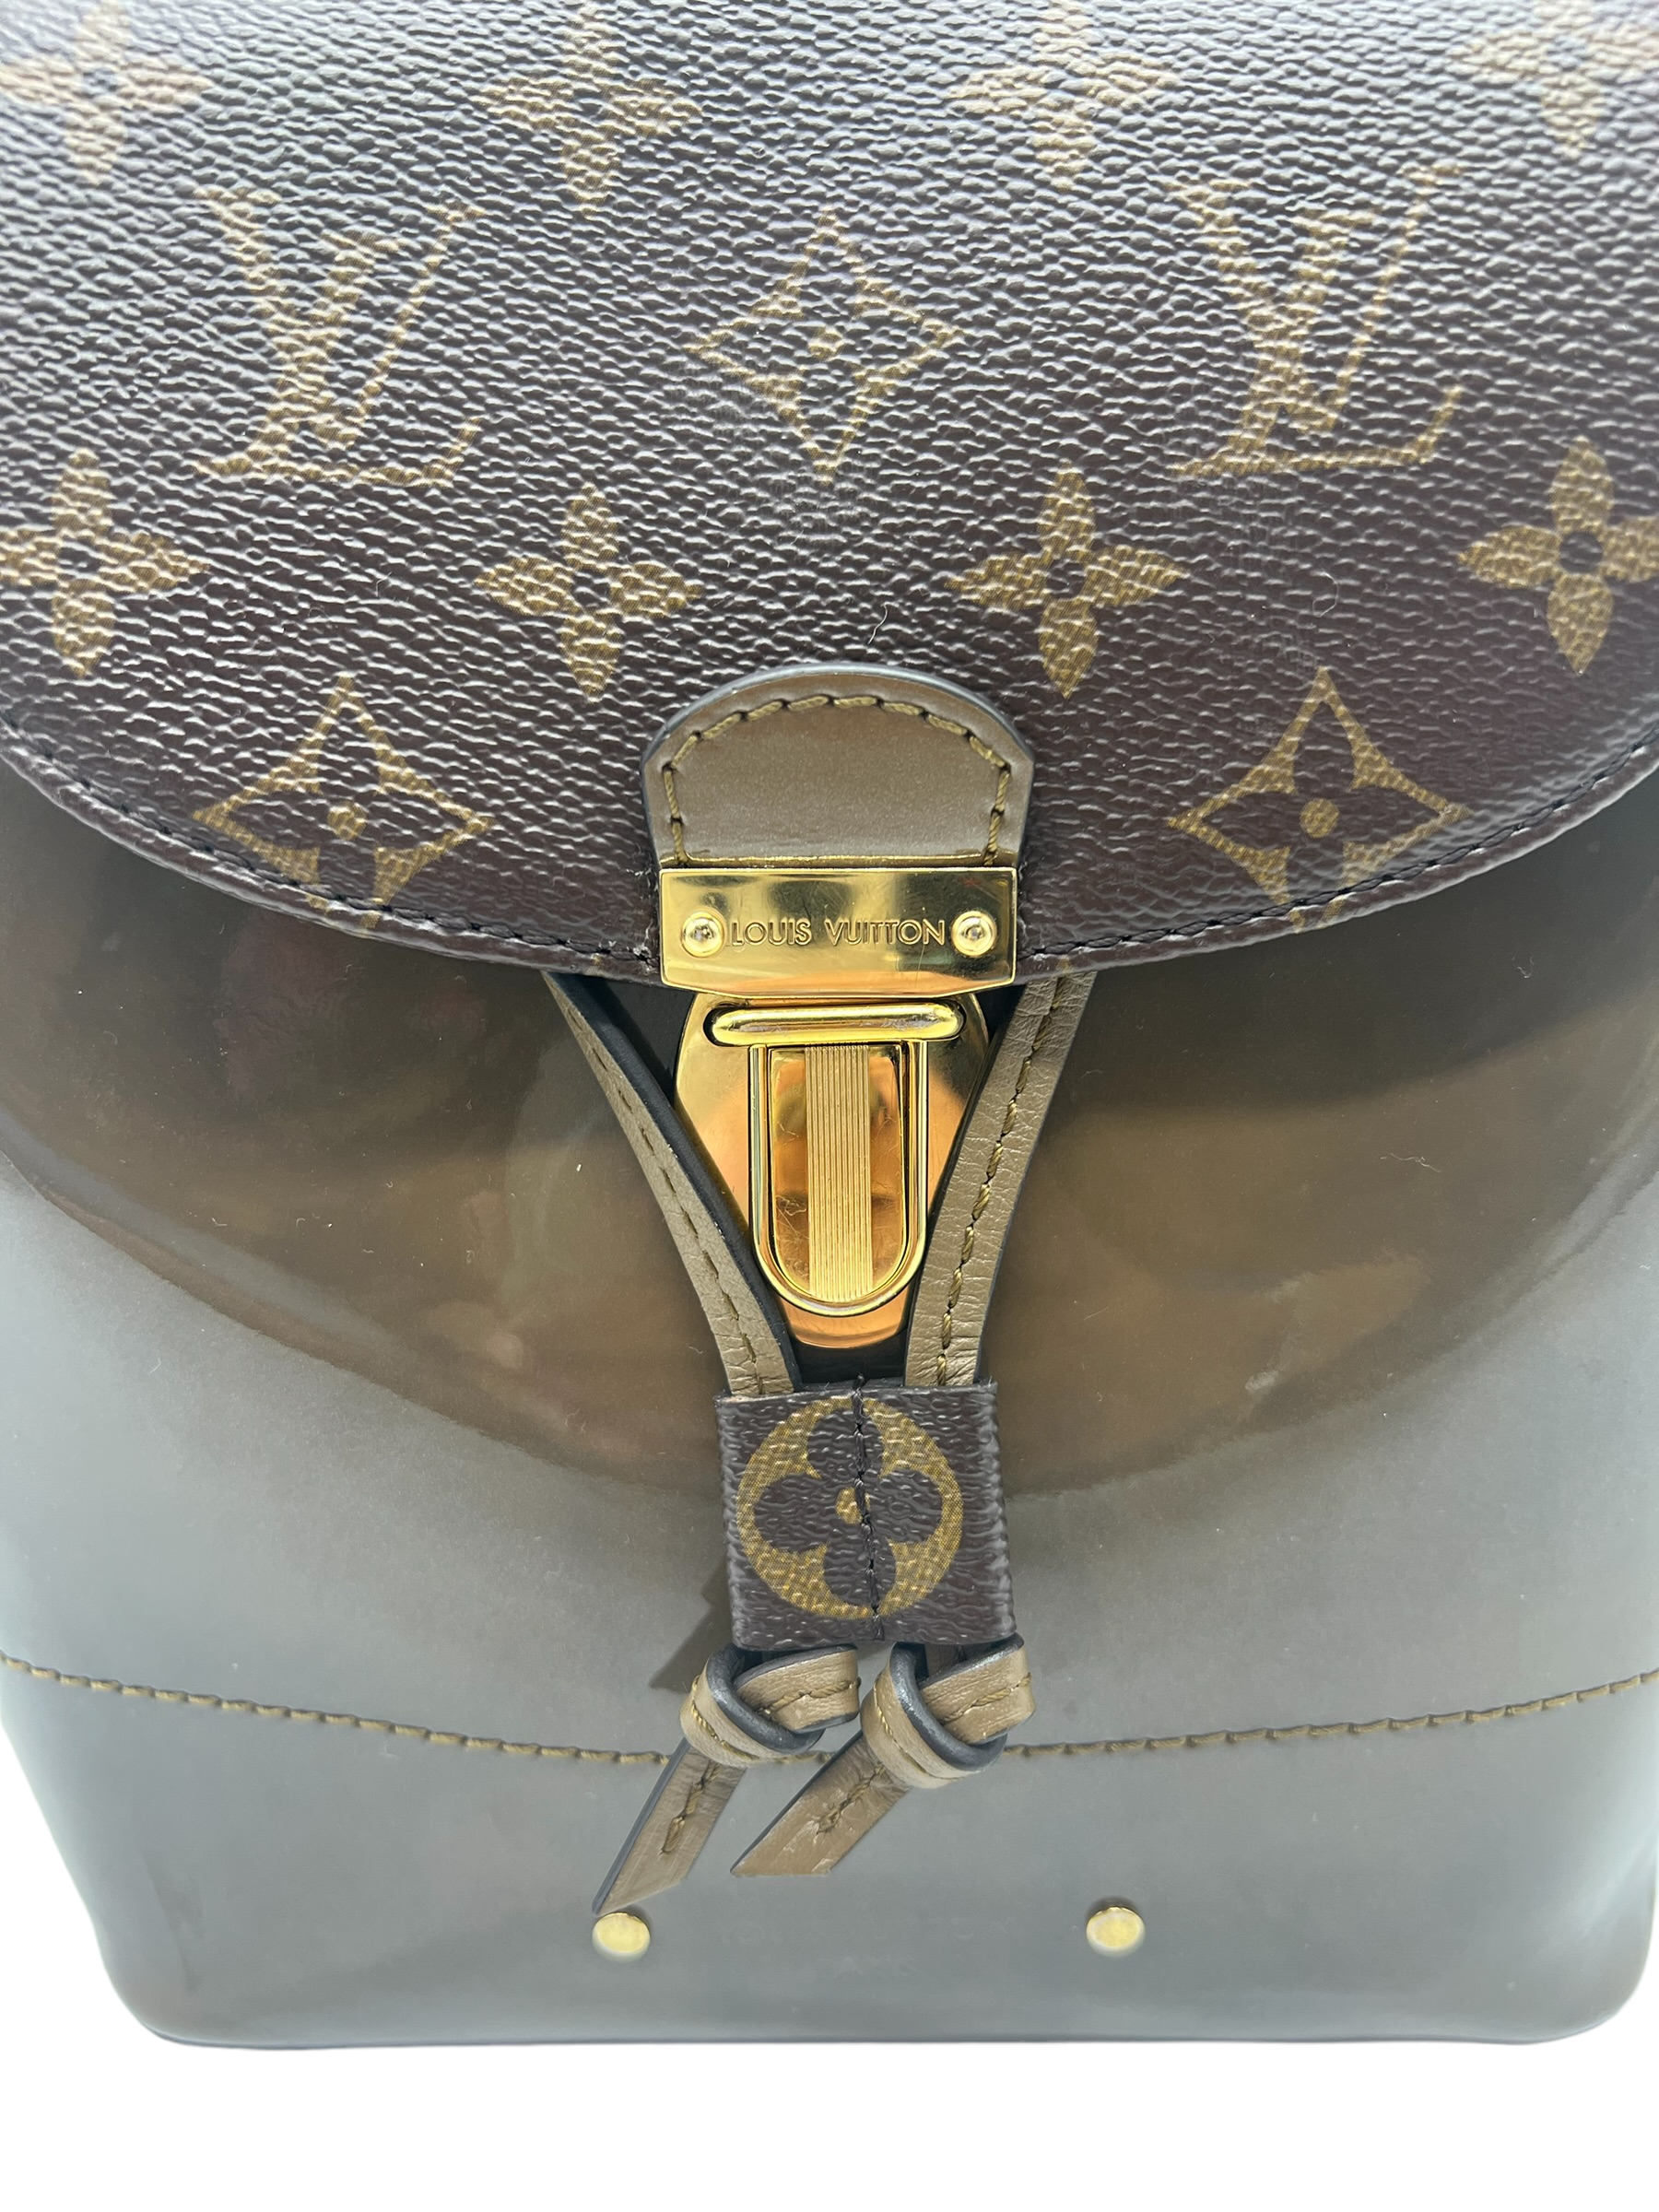 vuitton vernis backpack